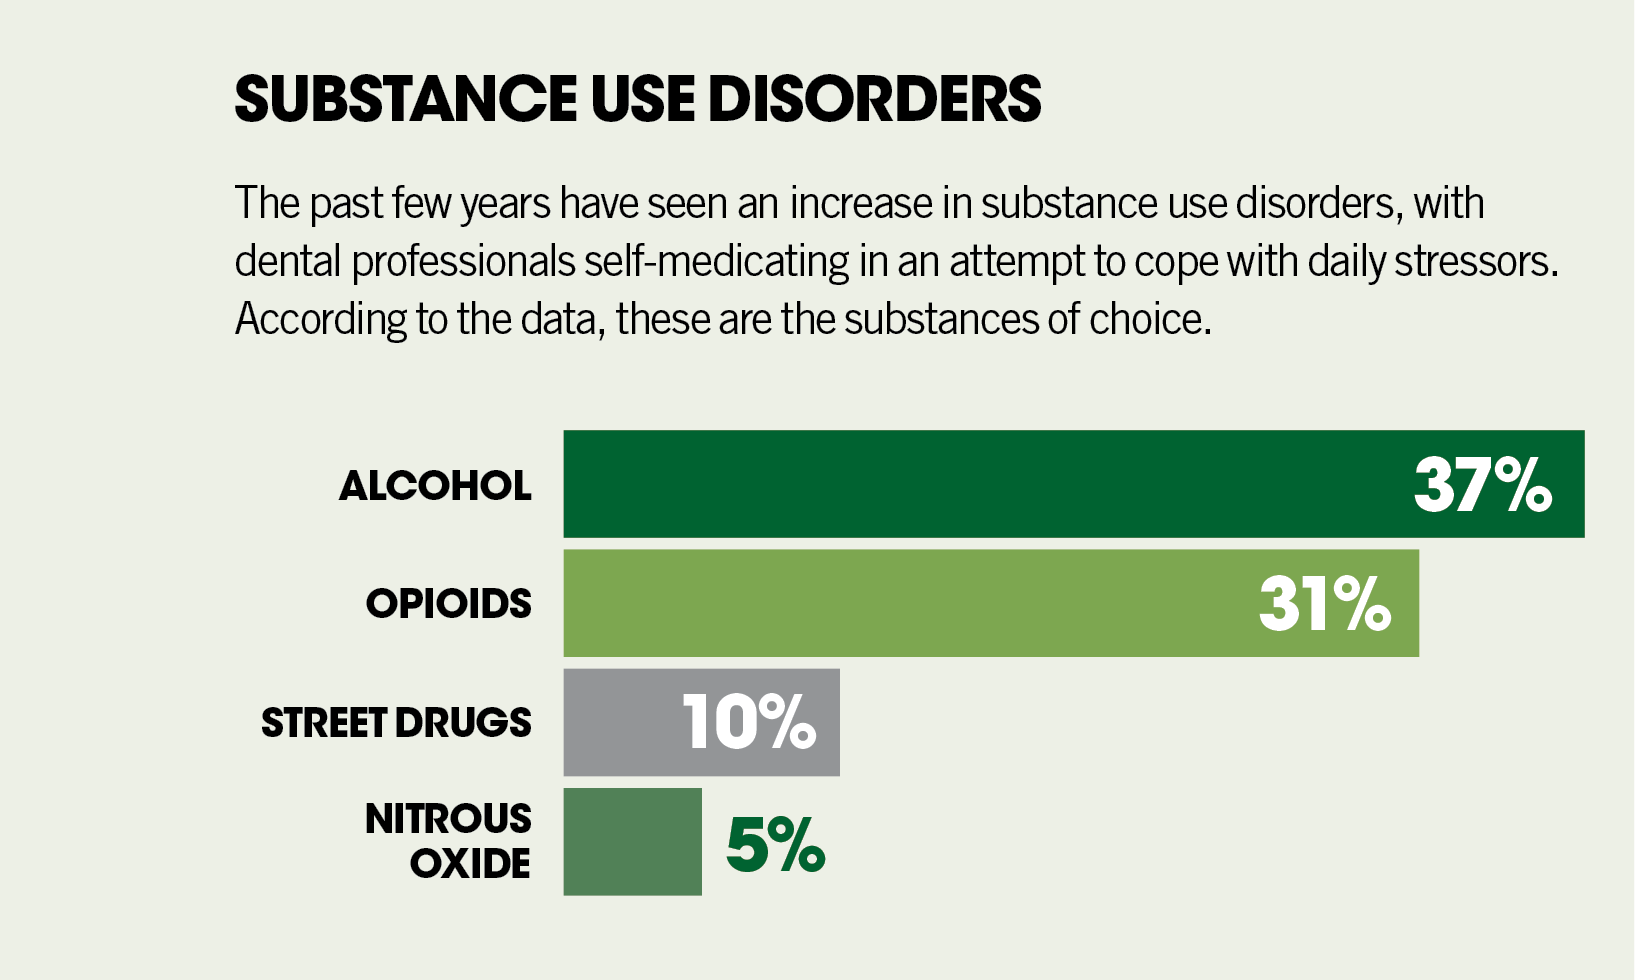 Data from a 2011 study on drug abuse/dependence among dentists.4